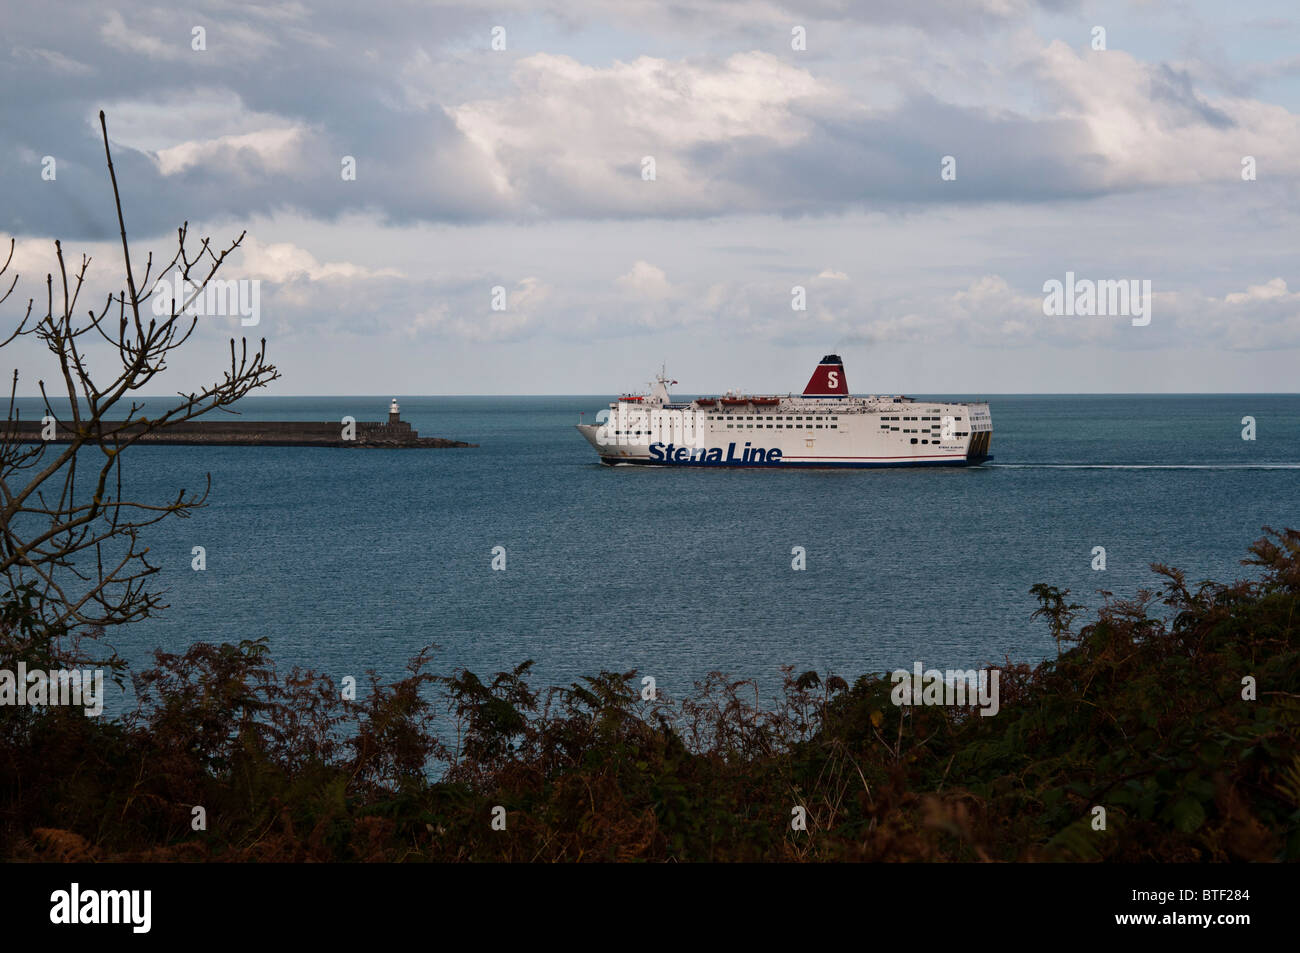 The Stena Line car ferry from Rosslare, Ireland arriving at Fishguard, Pembrokeshire, Wales, UK Stock Photo